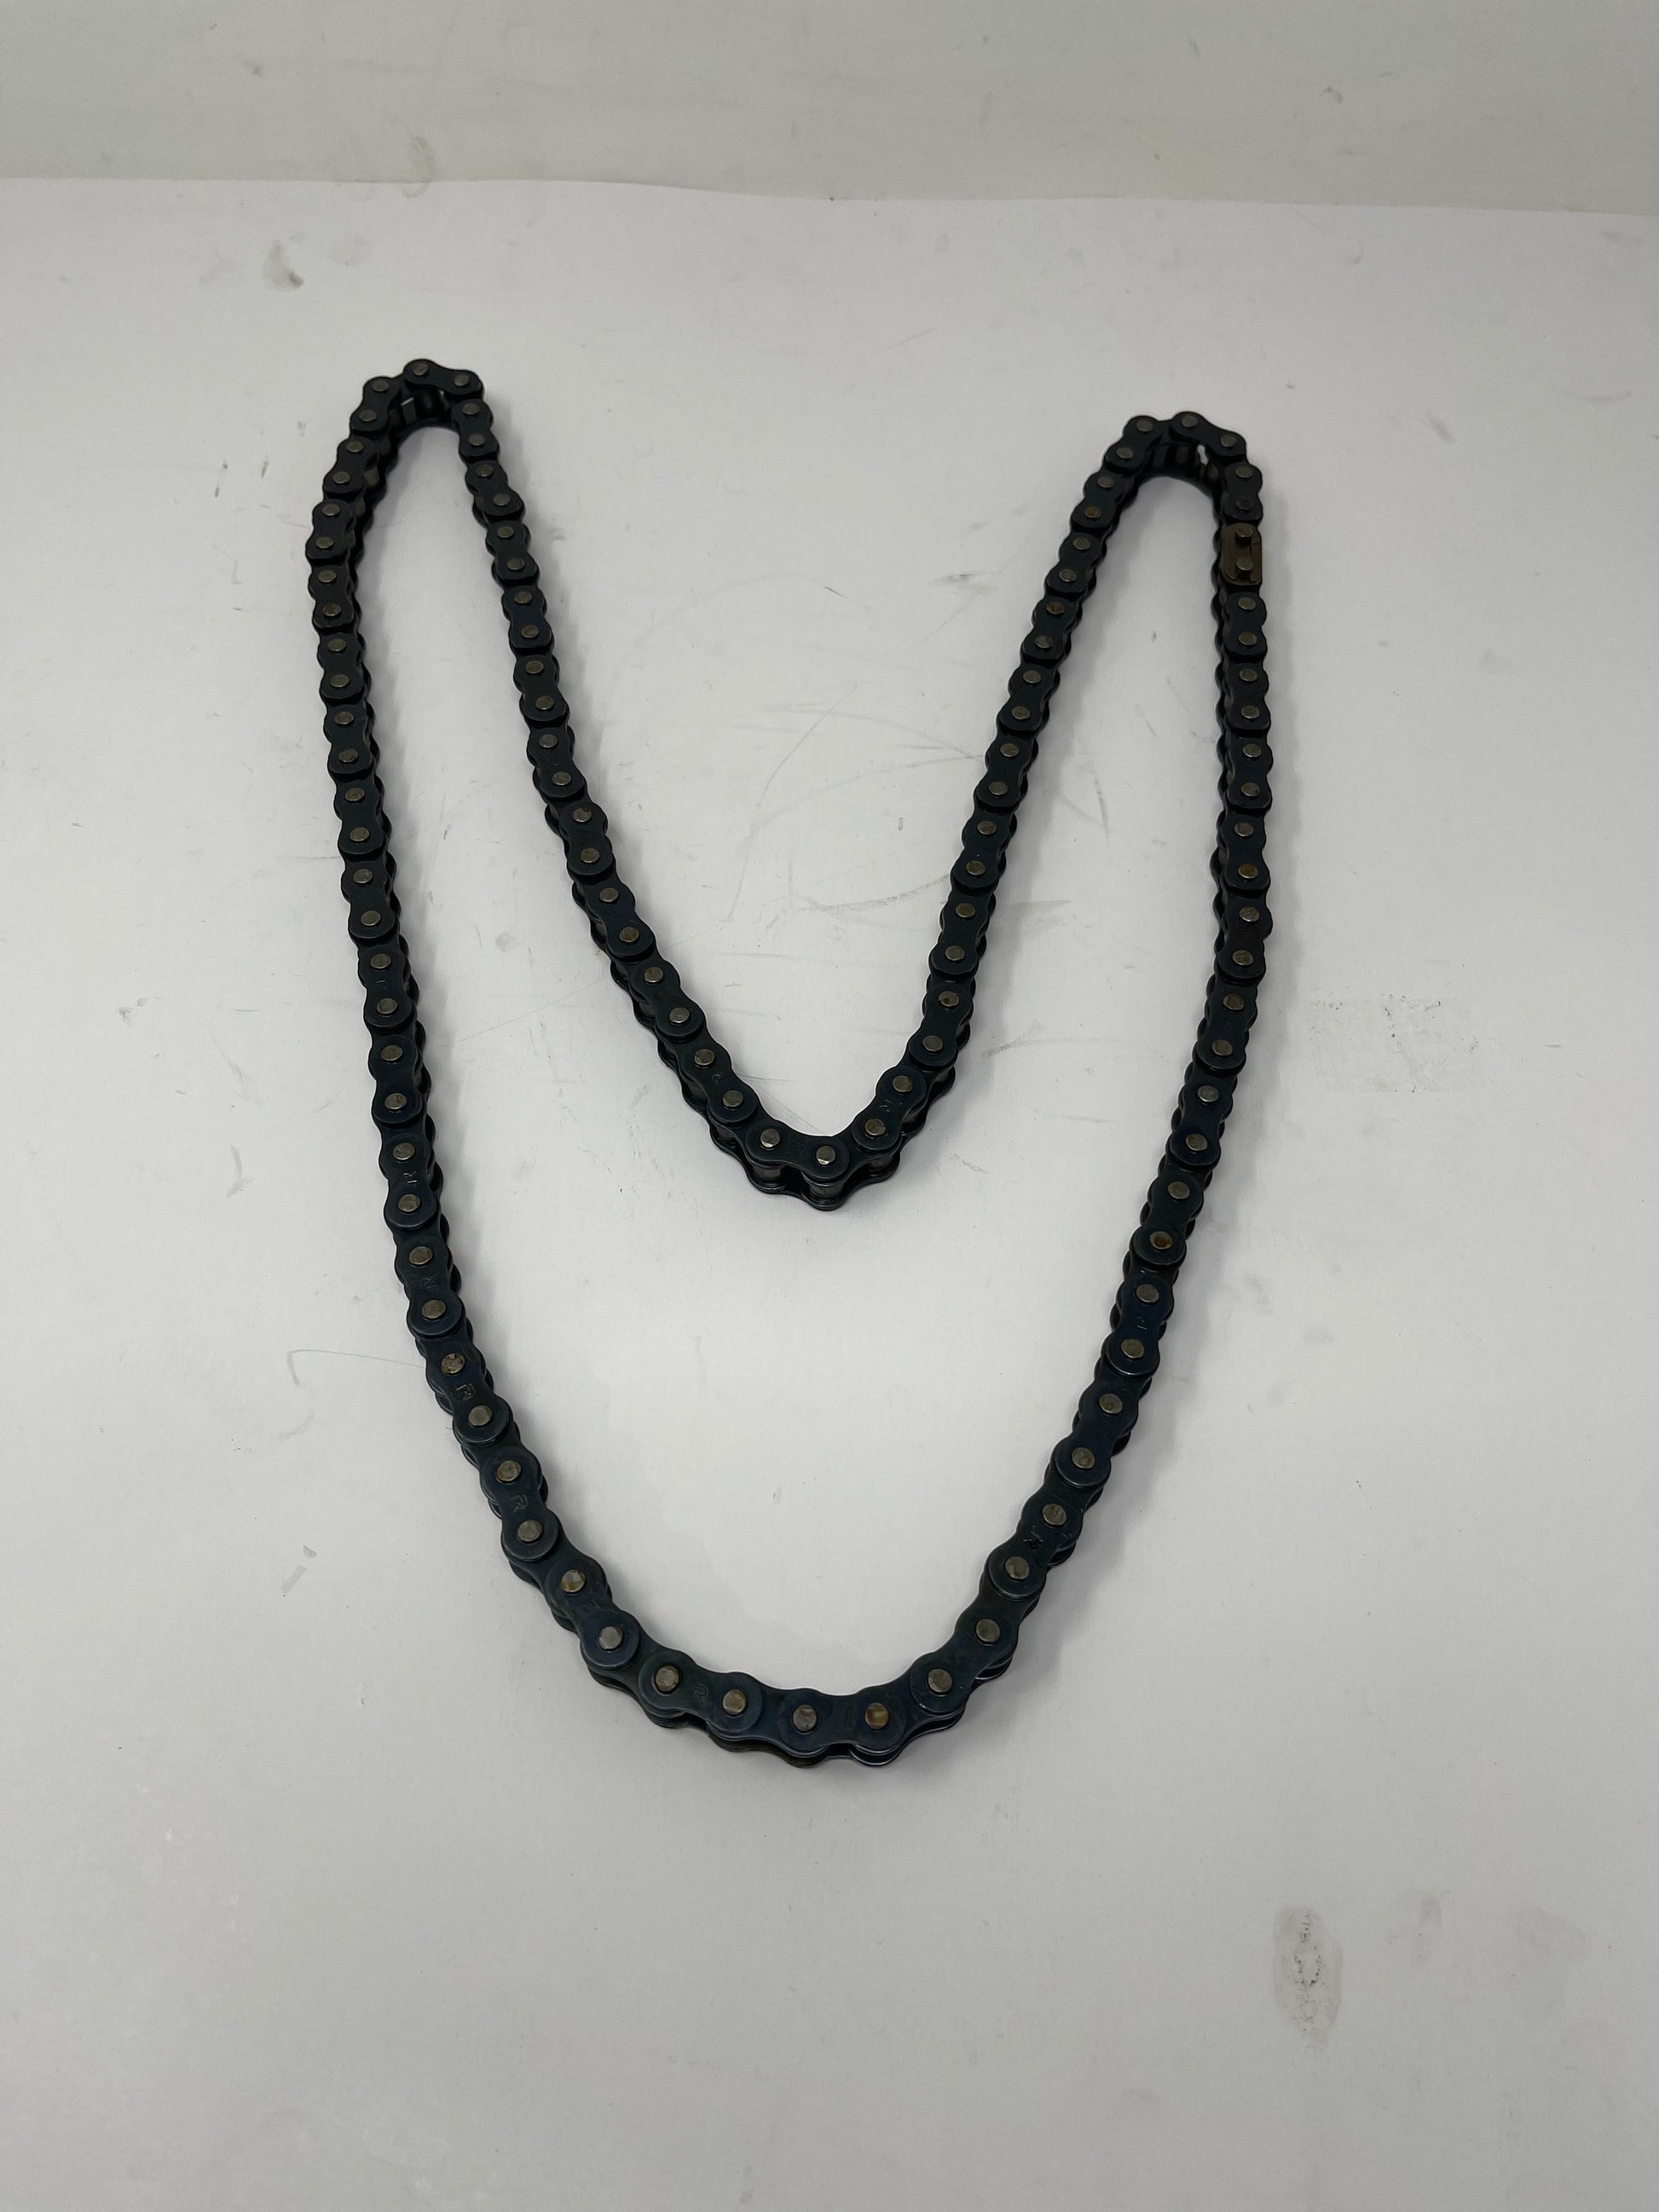 Chain for BD125-11 for sale. Baodiao BD125 chain for sale